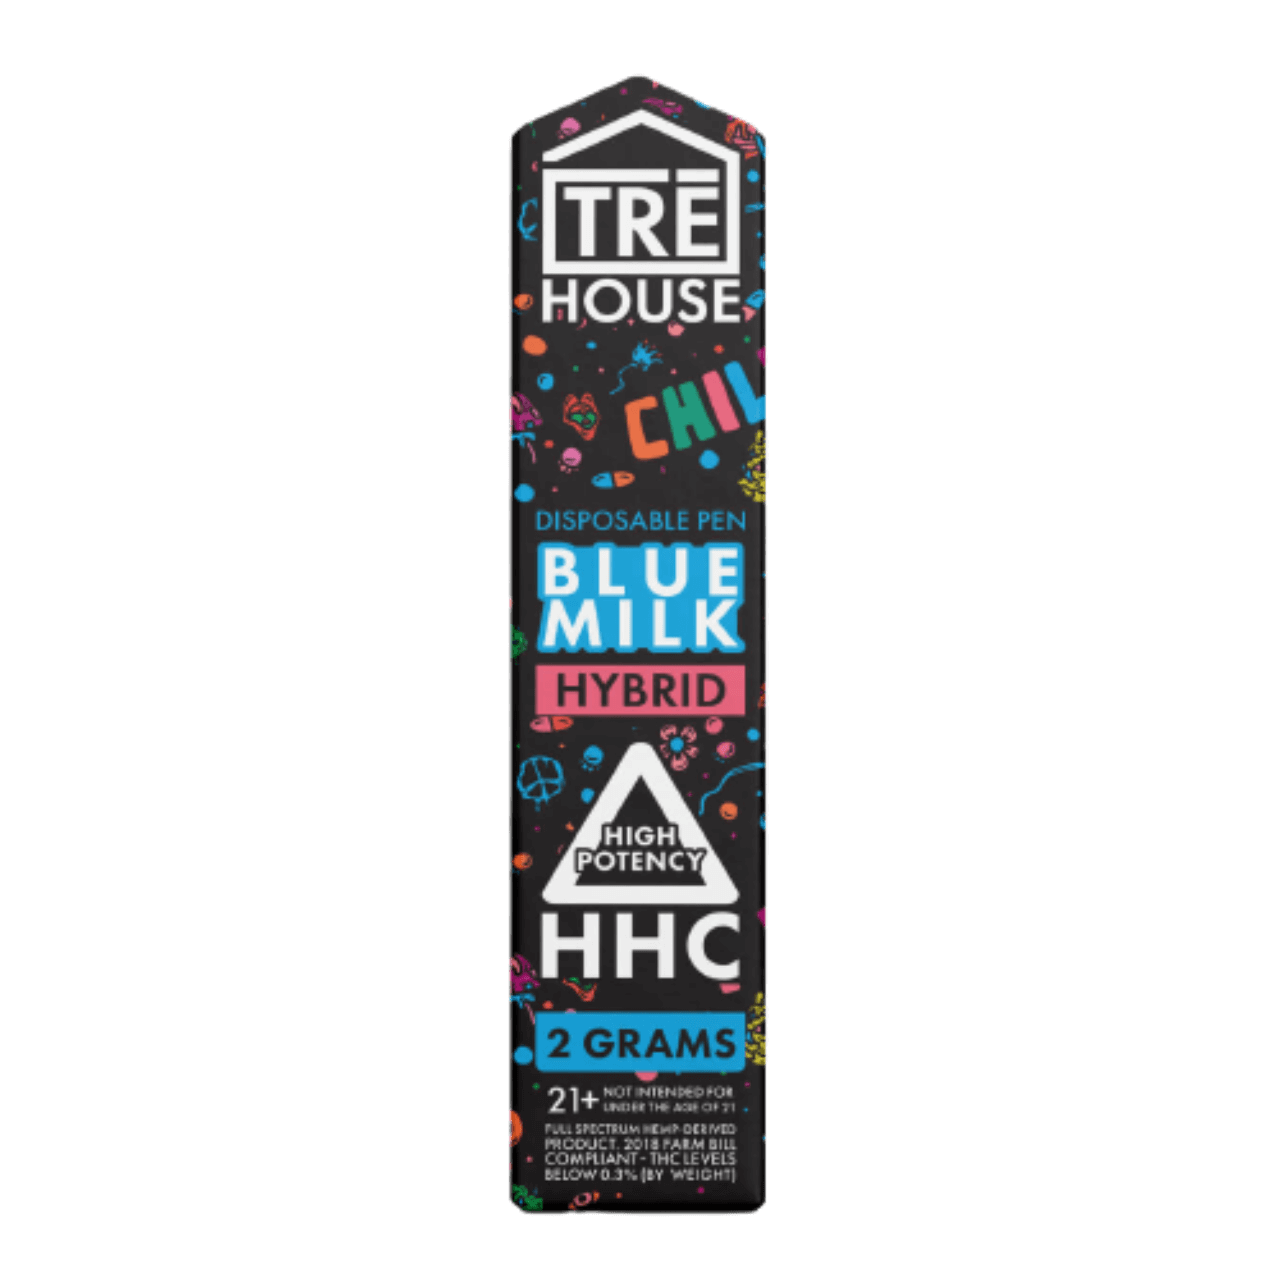 TRE House 2G High Potency HHC Disposable